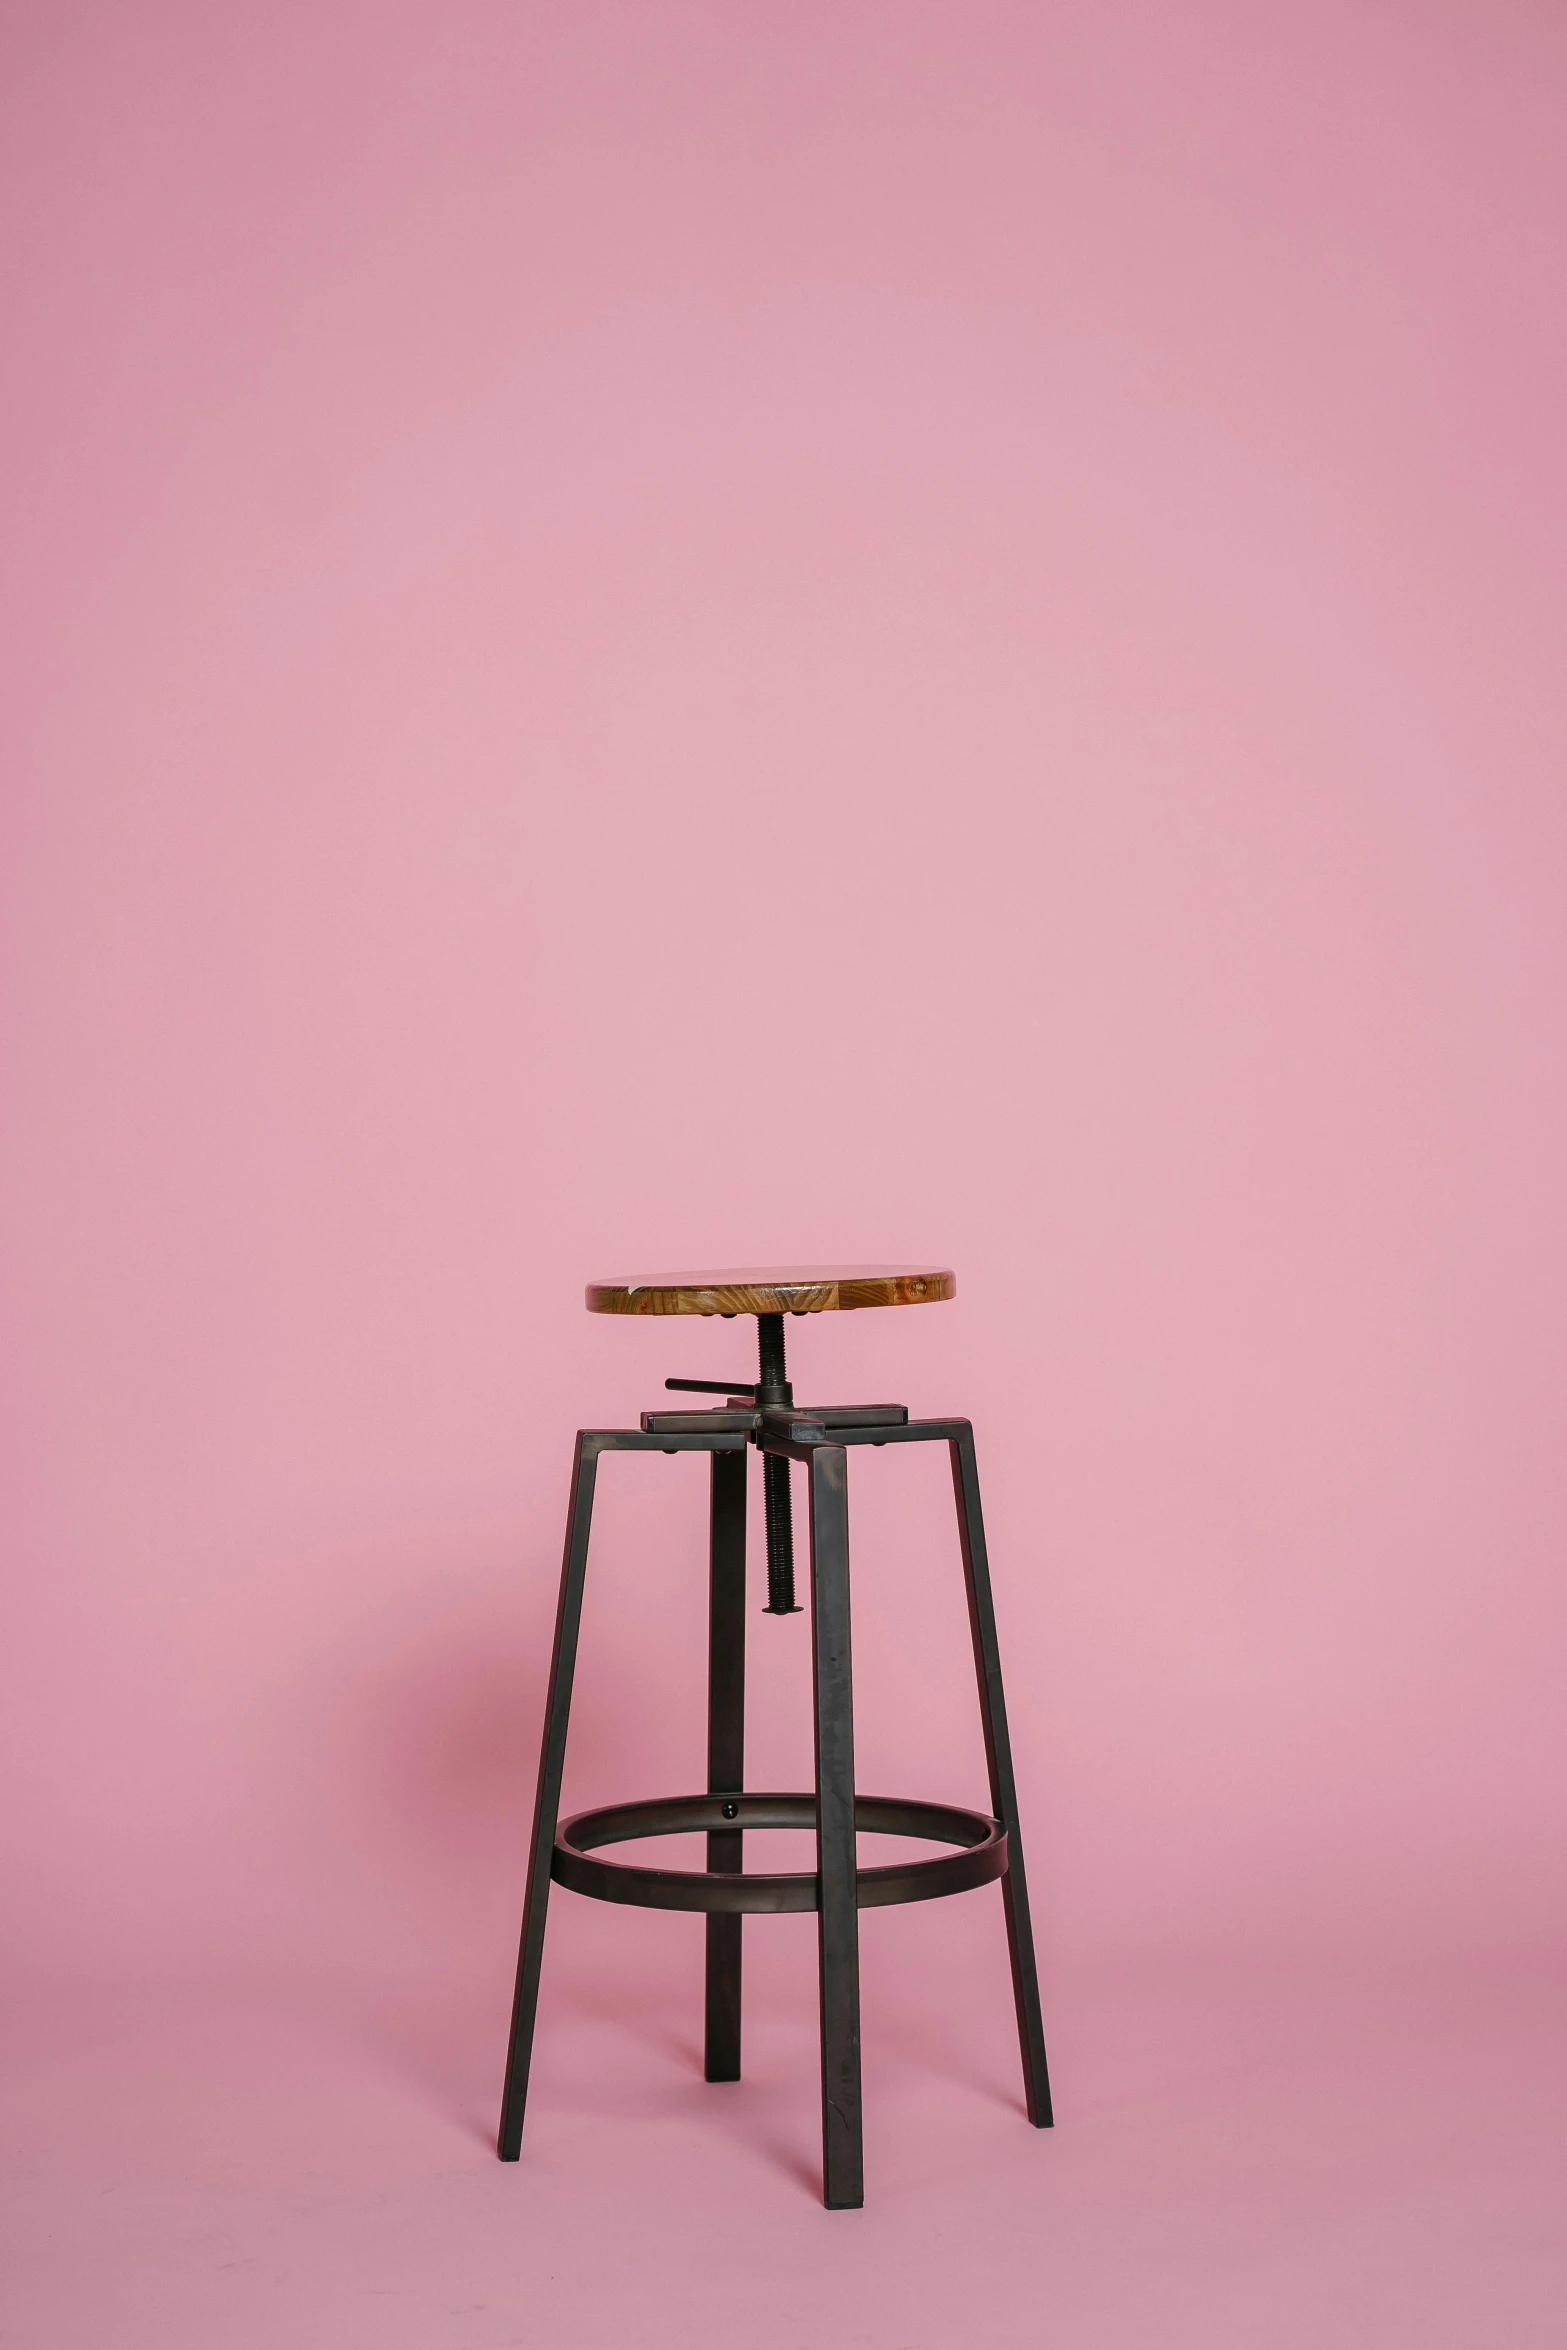 a wooden stool against a pink wall, trending on unsplash, hero shot, blank background, multiple stories, 15081959 21121991 01012000 4k